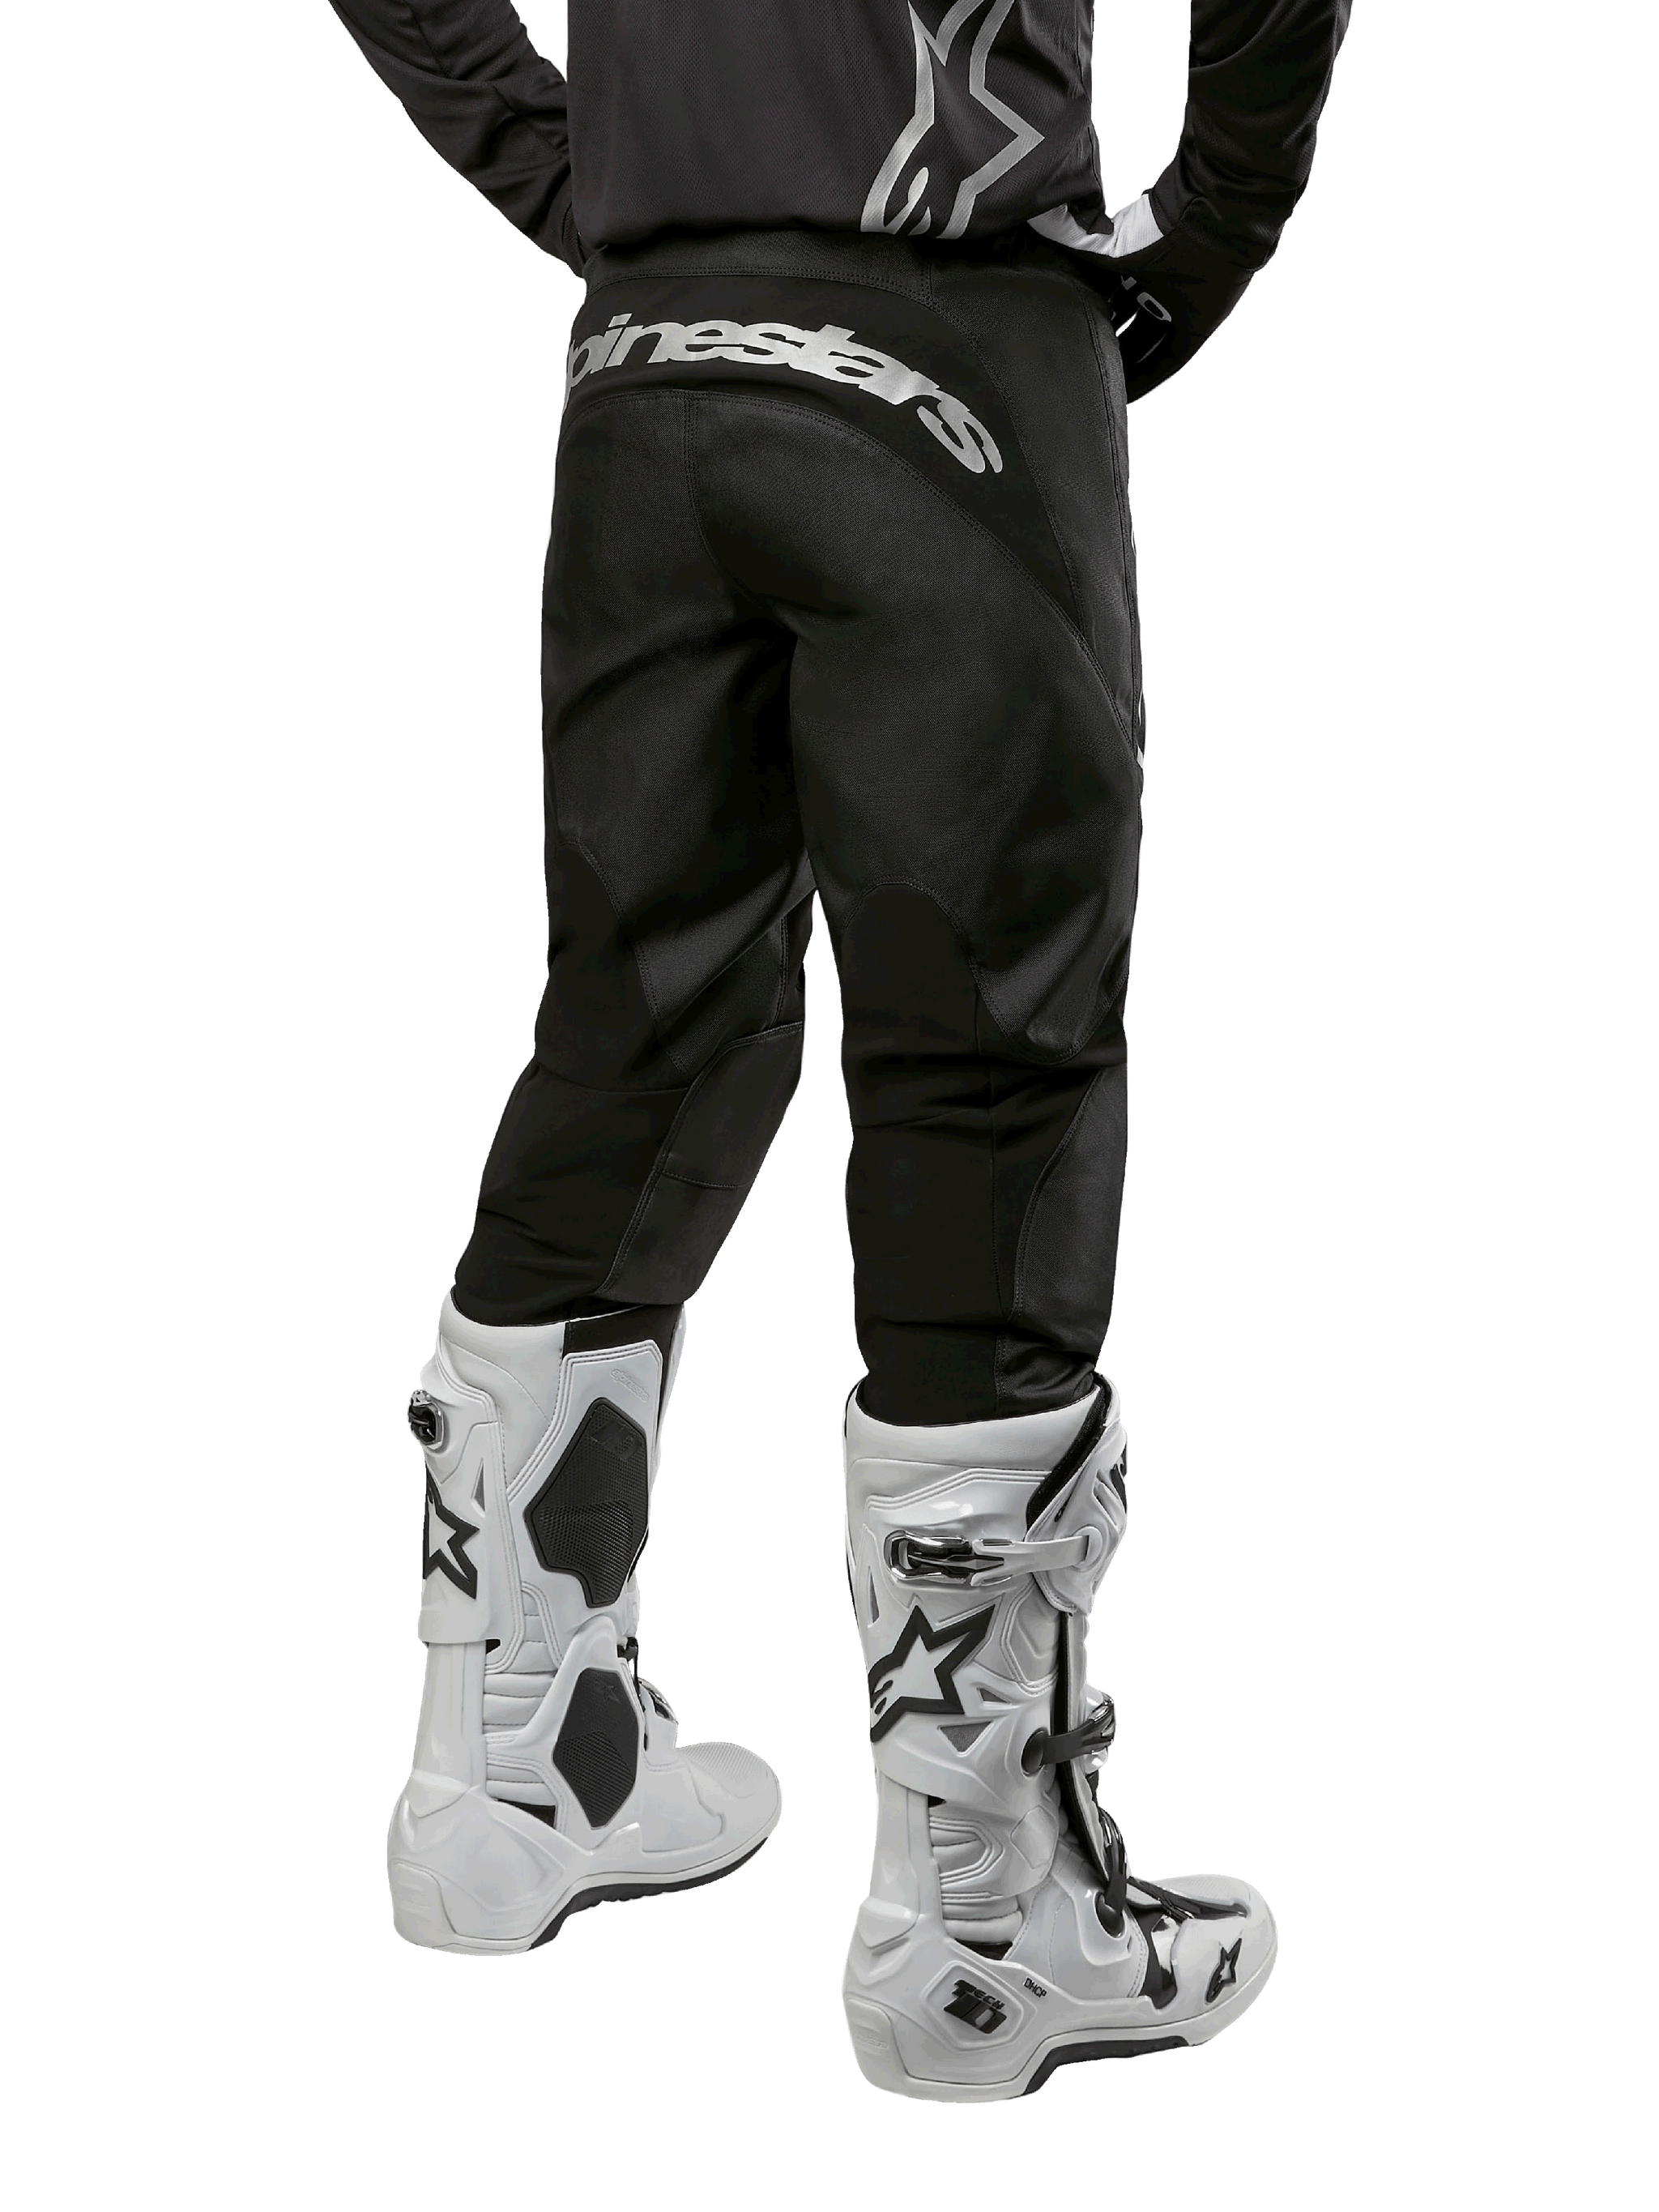 MX24 Collection | Alpinestars® Official Site